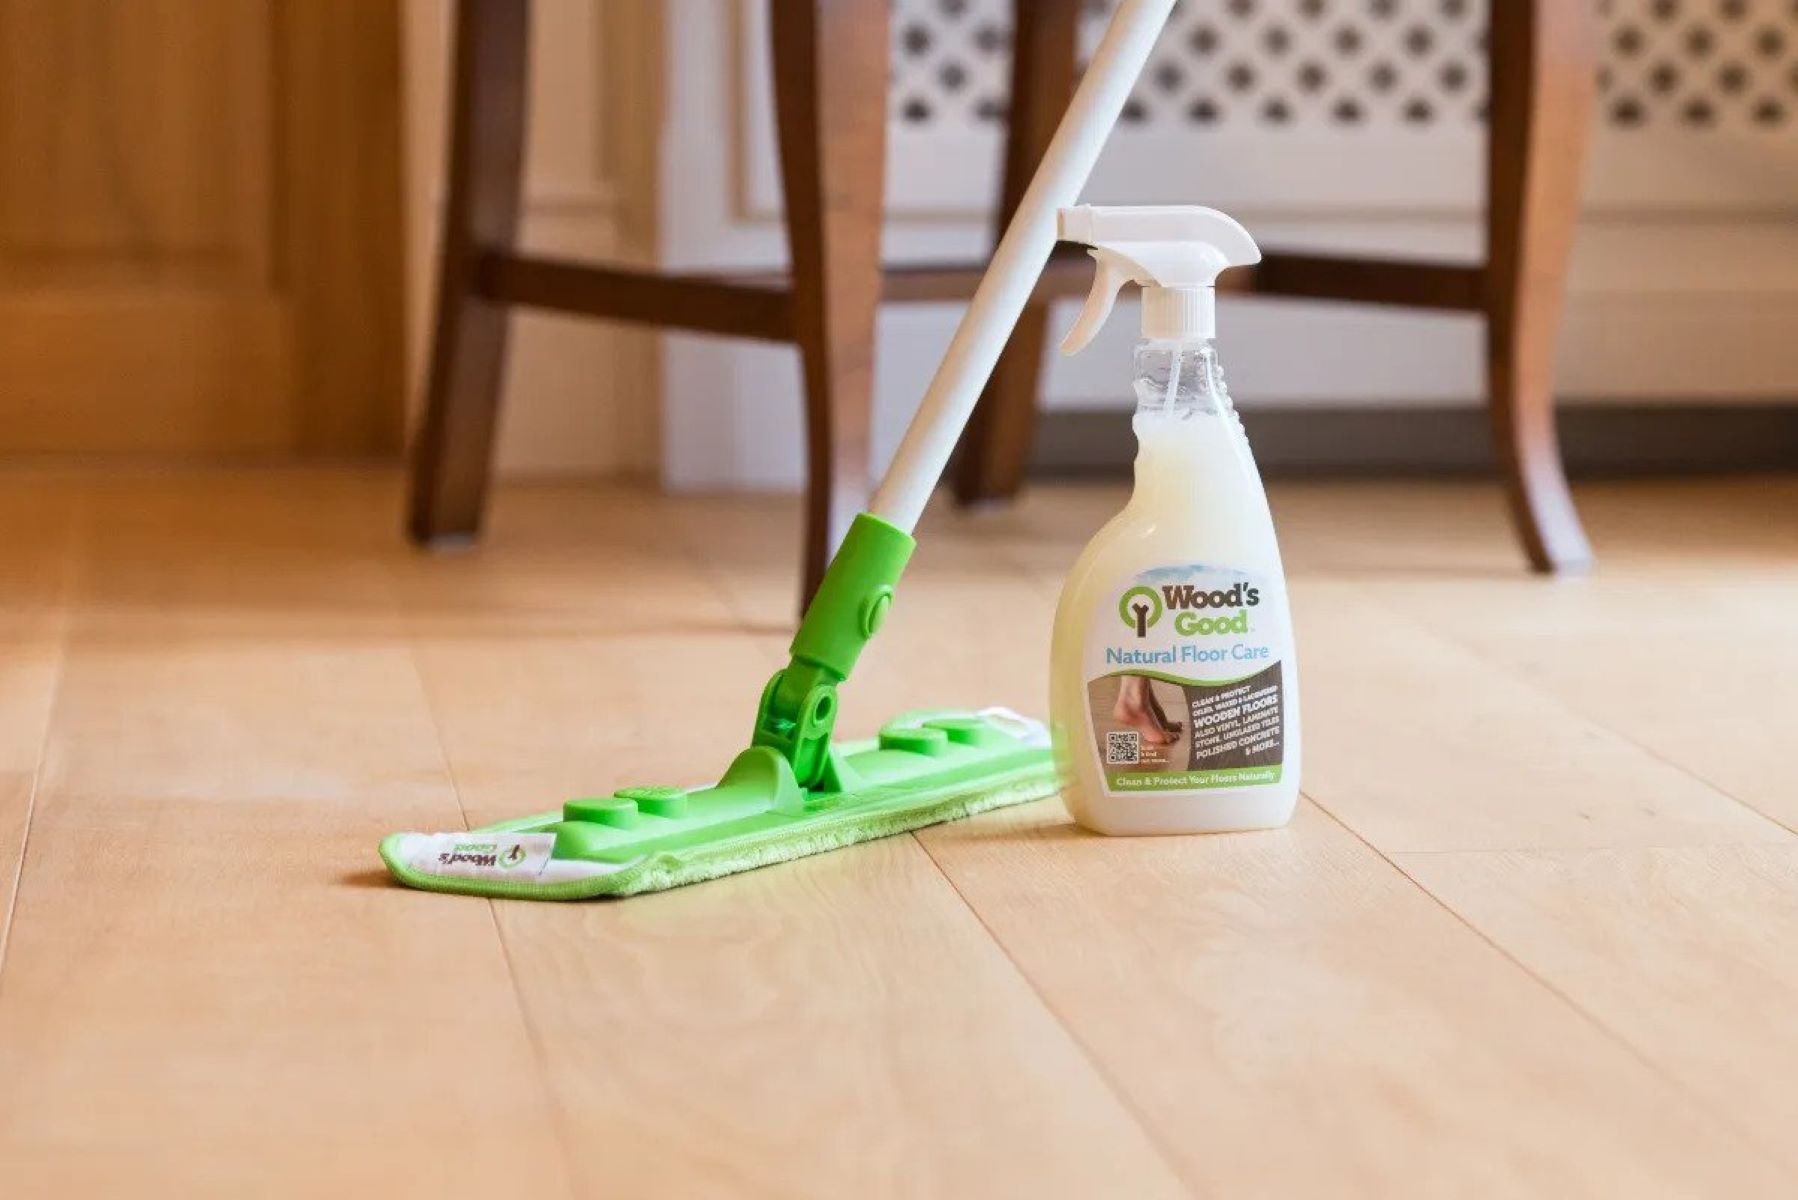 Zep Neutral PH Industrial Floor Cleaner - 1 Gallon - ZUNEUT128 -  Concentrated Pro Trusted All-Purpose Floor Cleaner